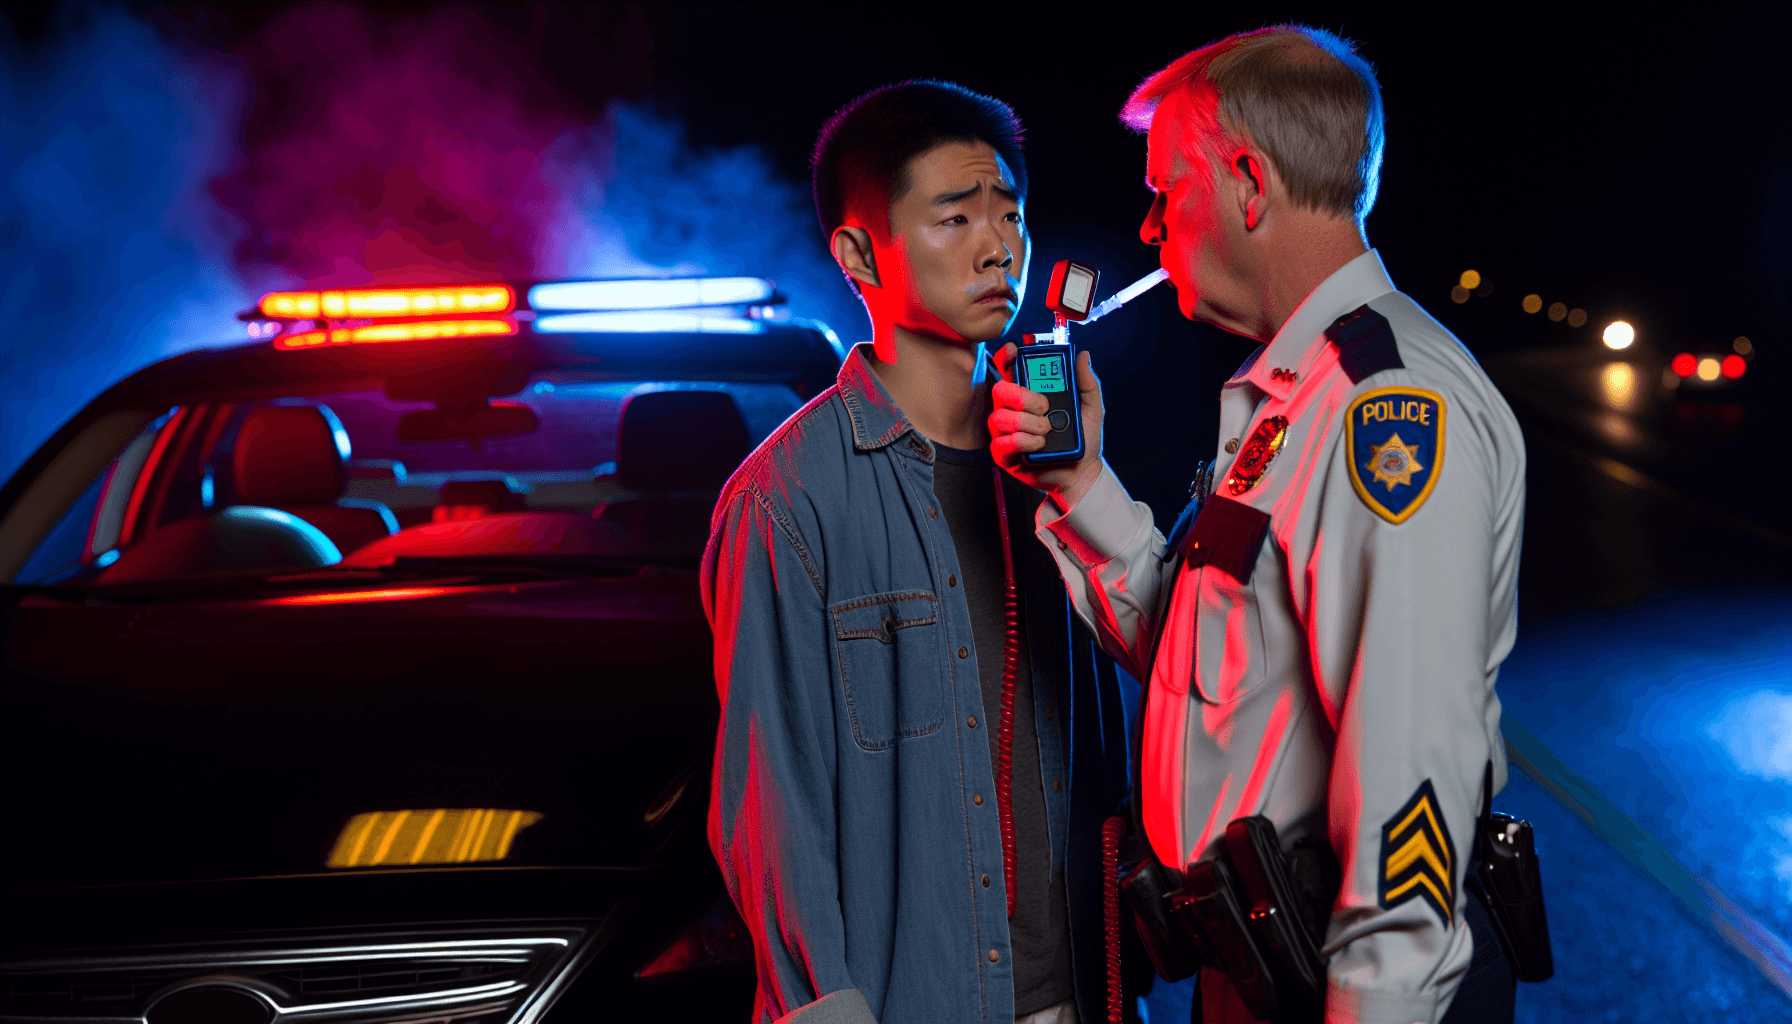 Photo of a breathalyzer test being administered to a person suspected of DUI or DWI